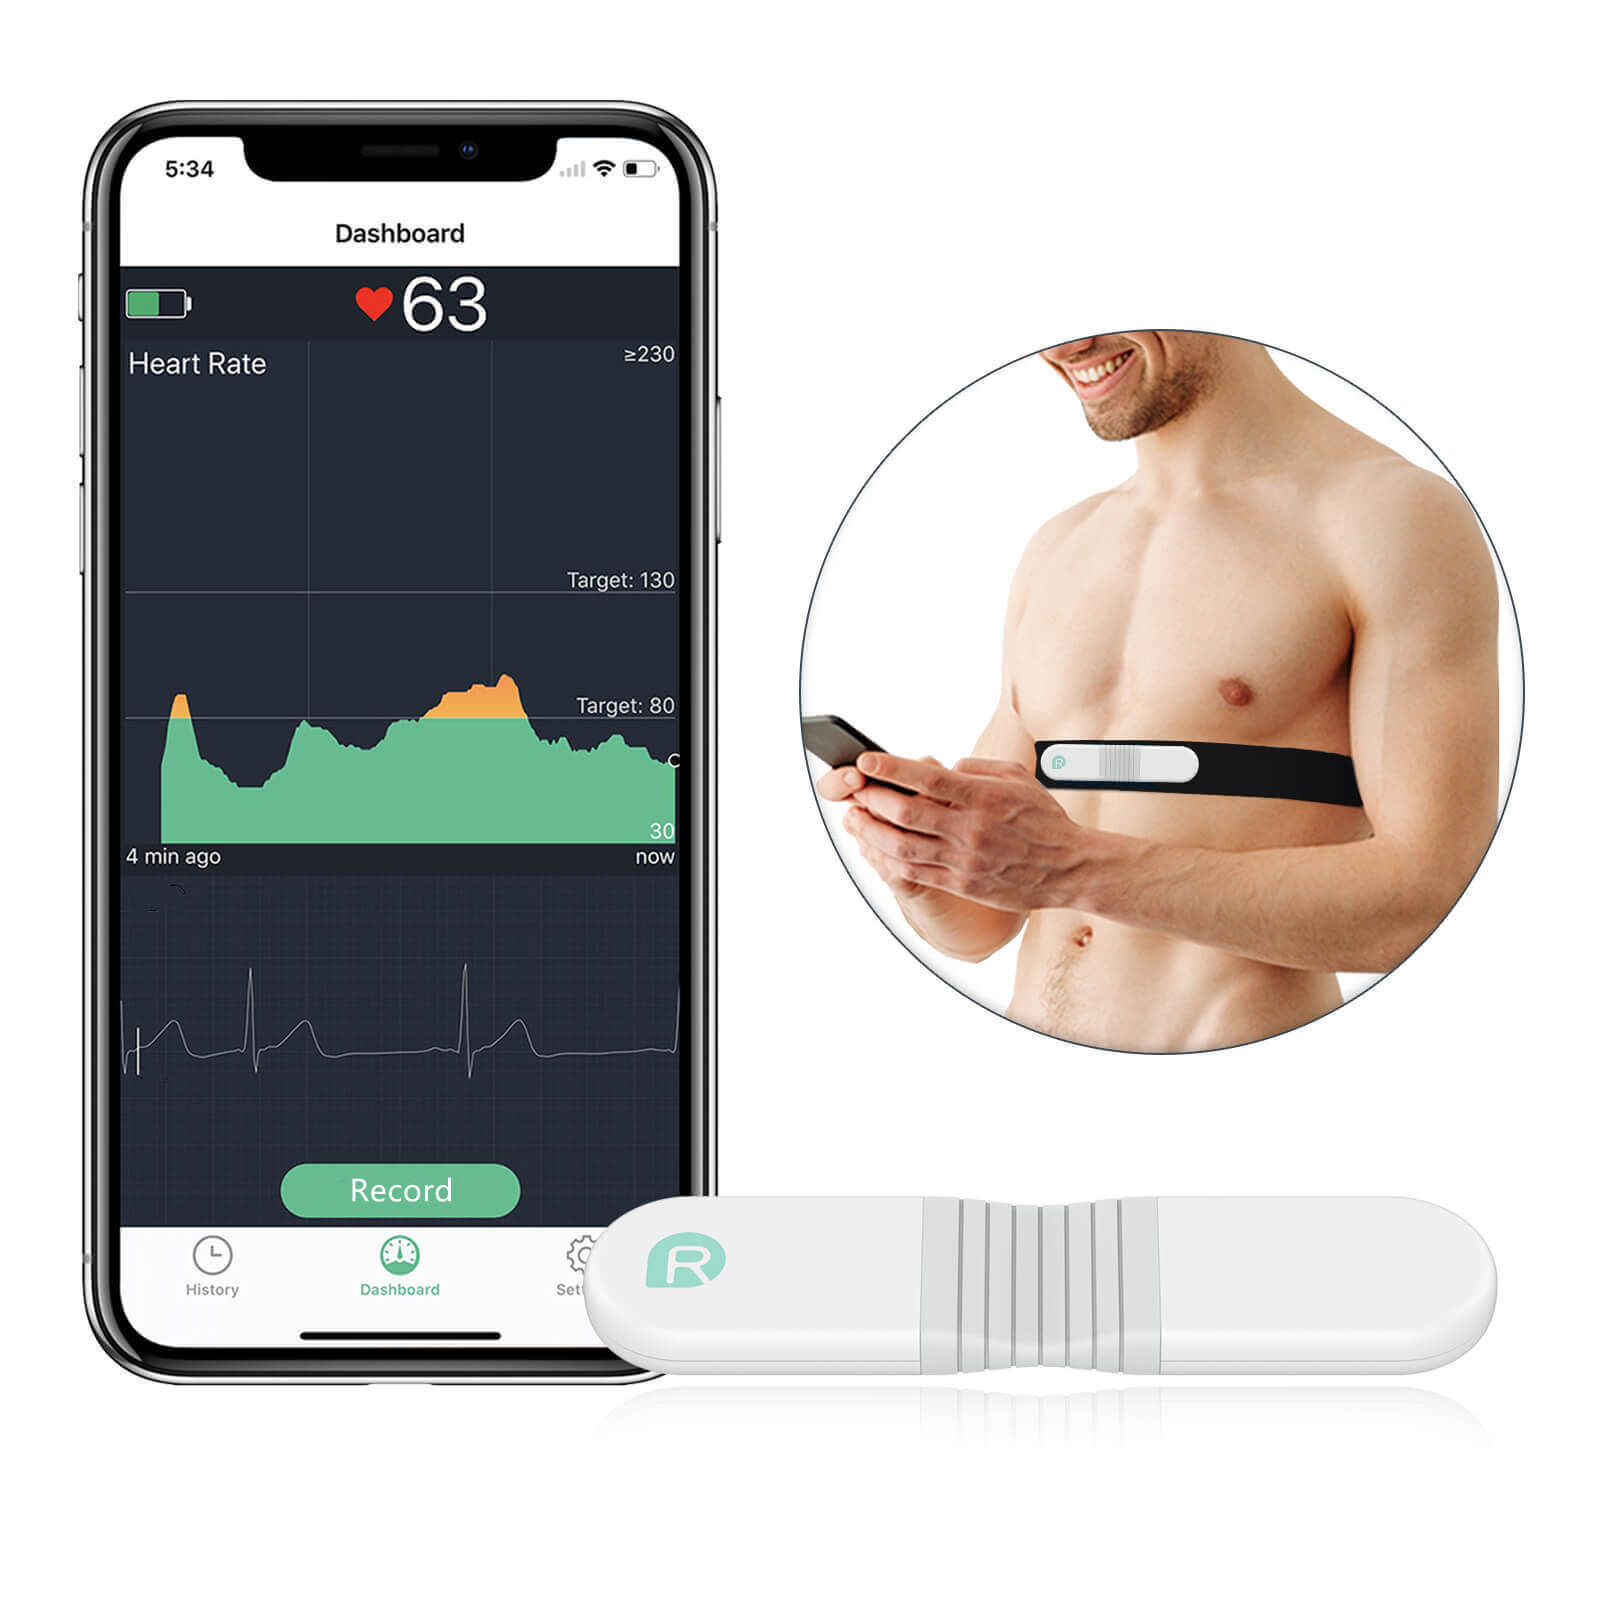 Vibeat Finger Oxygen Monitor with Heart Rate Tracker, FSA/HSA